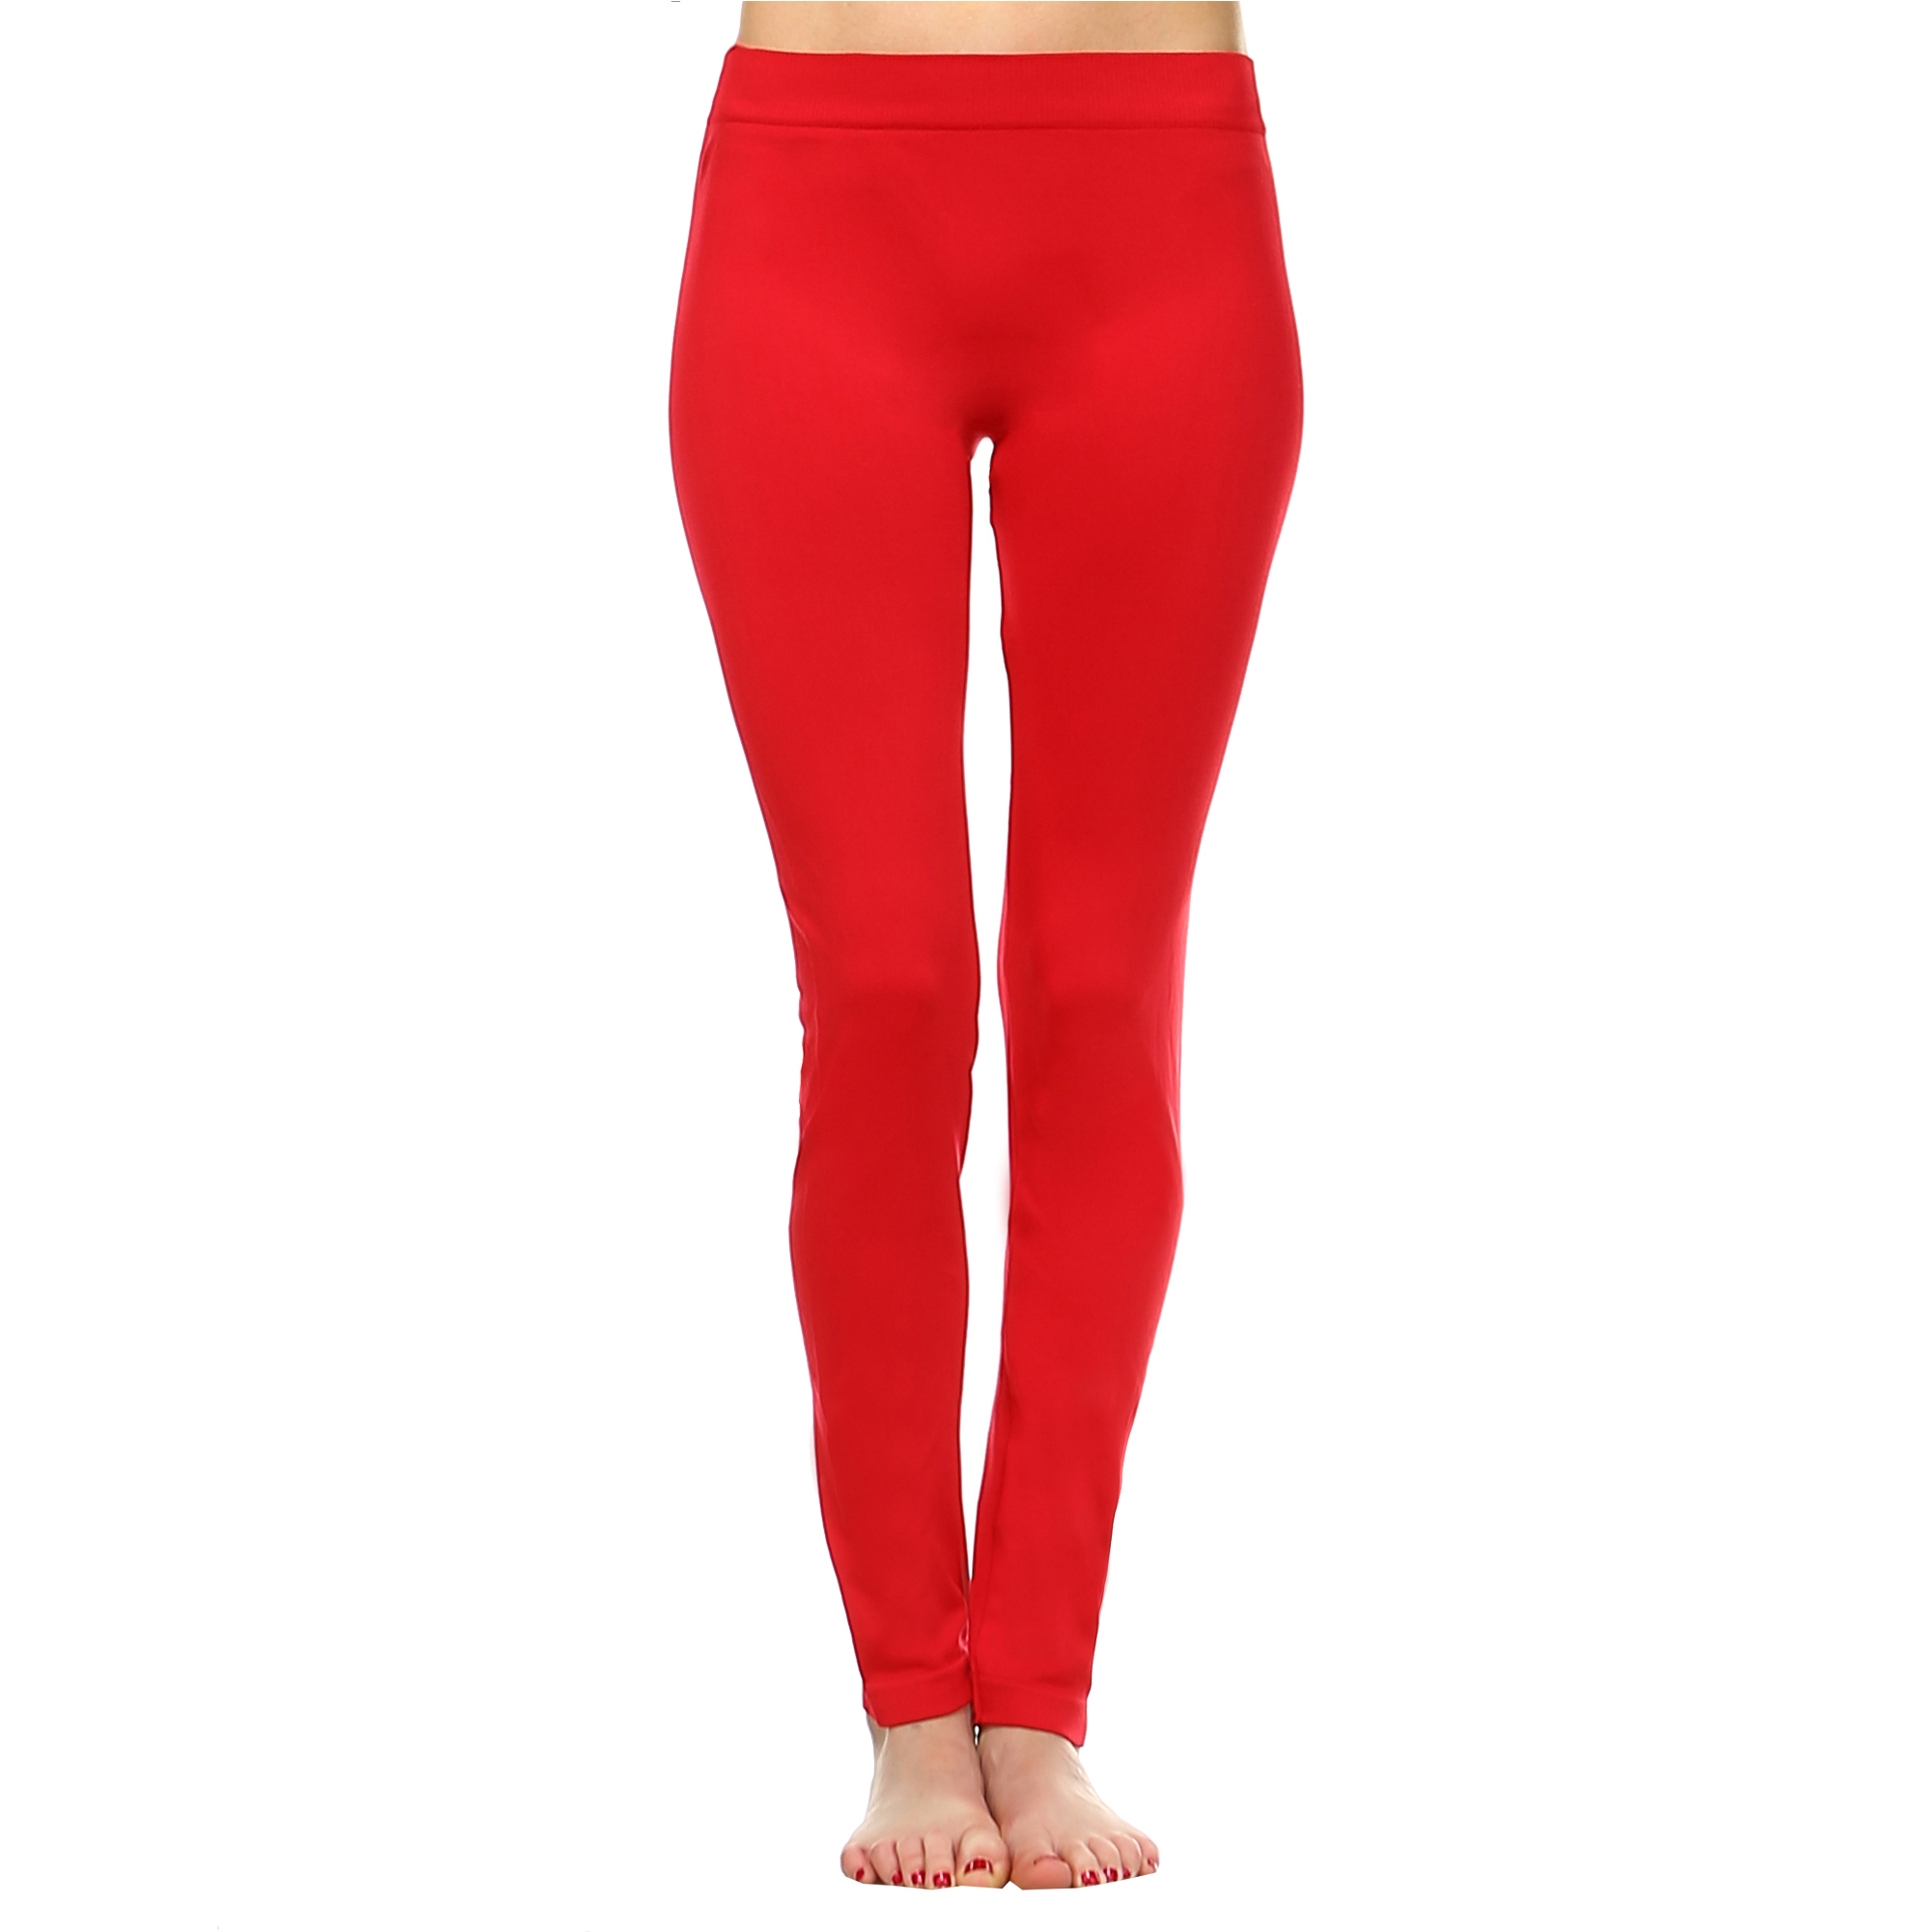 White Mark Women's Stretch Leggings - Red, One Size